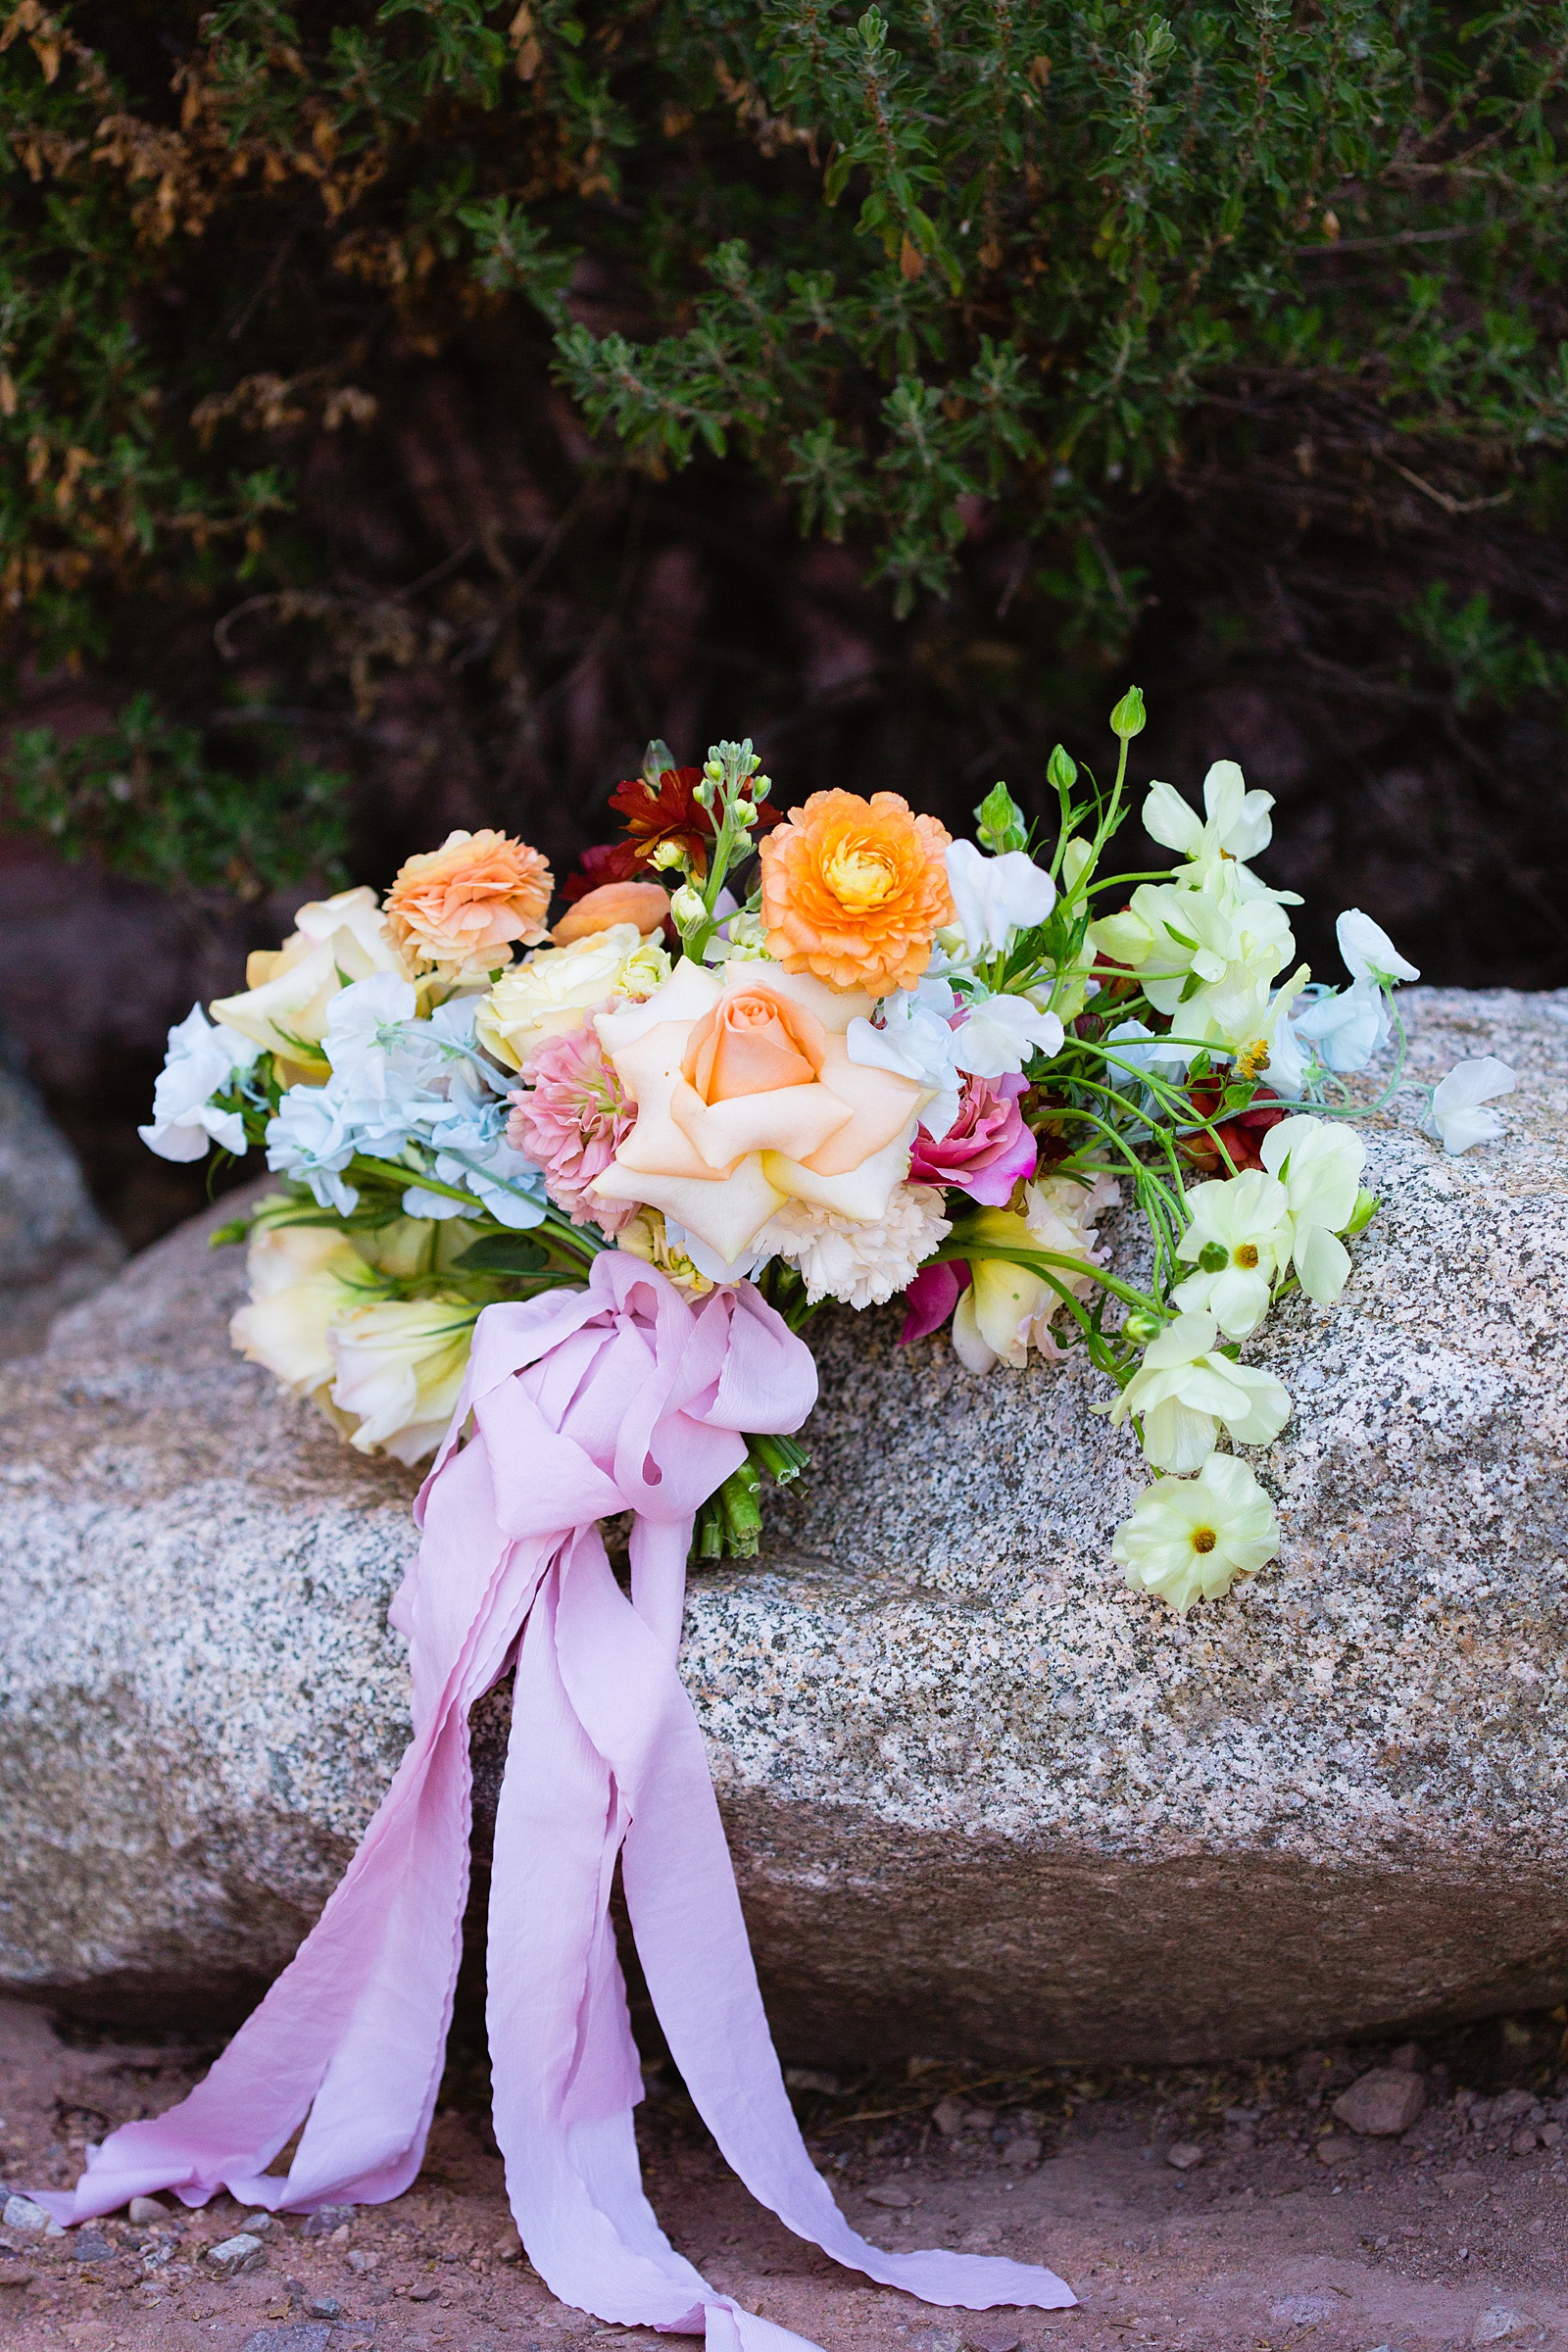 Bride's colorful and elegant bouquet by PMA Photography.